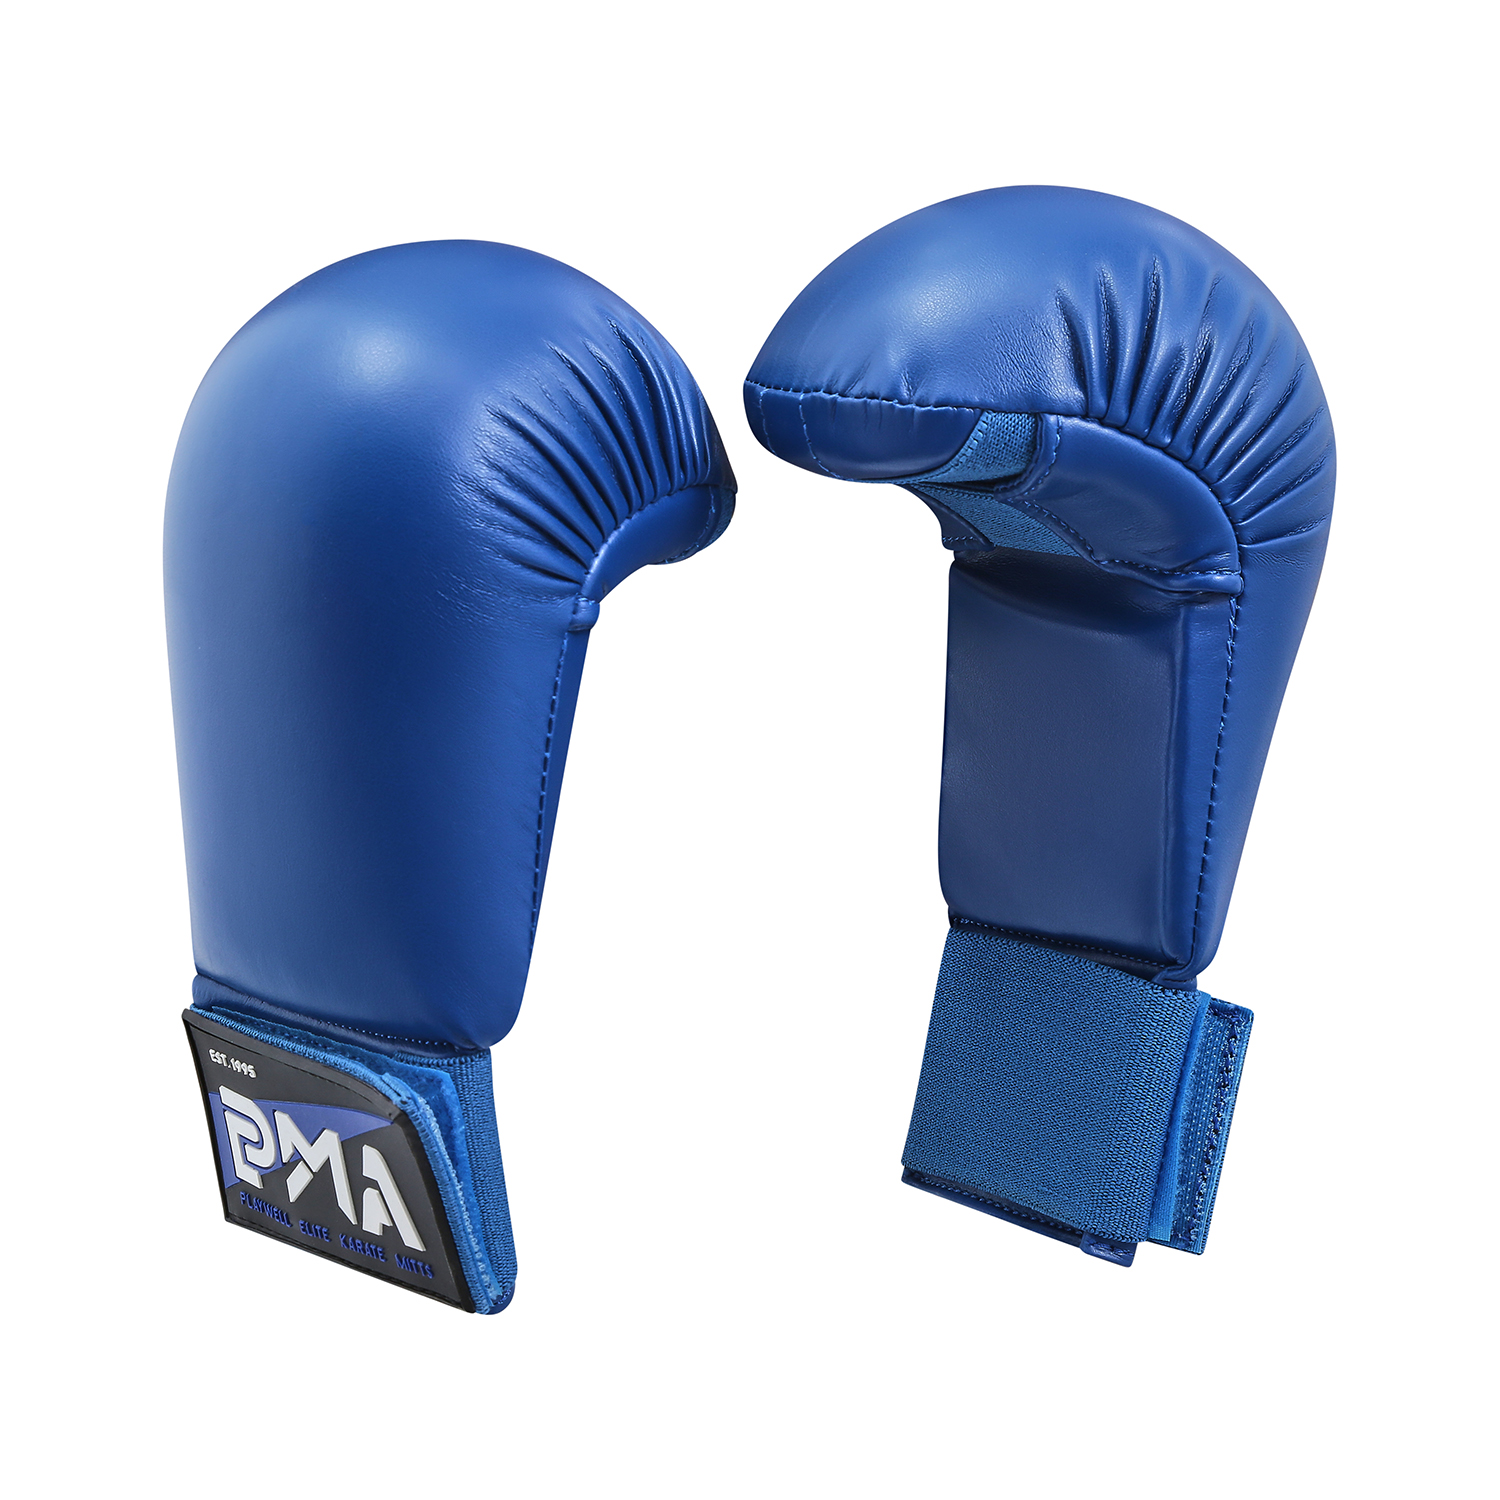 Deluxe Competition Vinyl Karate Mitts - Click Image to Close